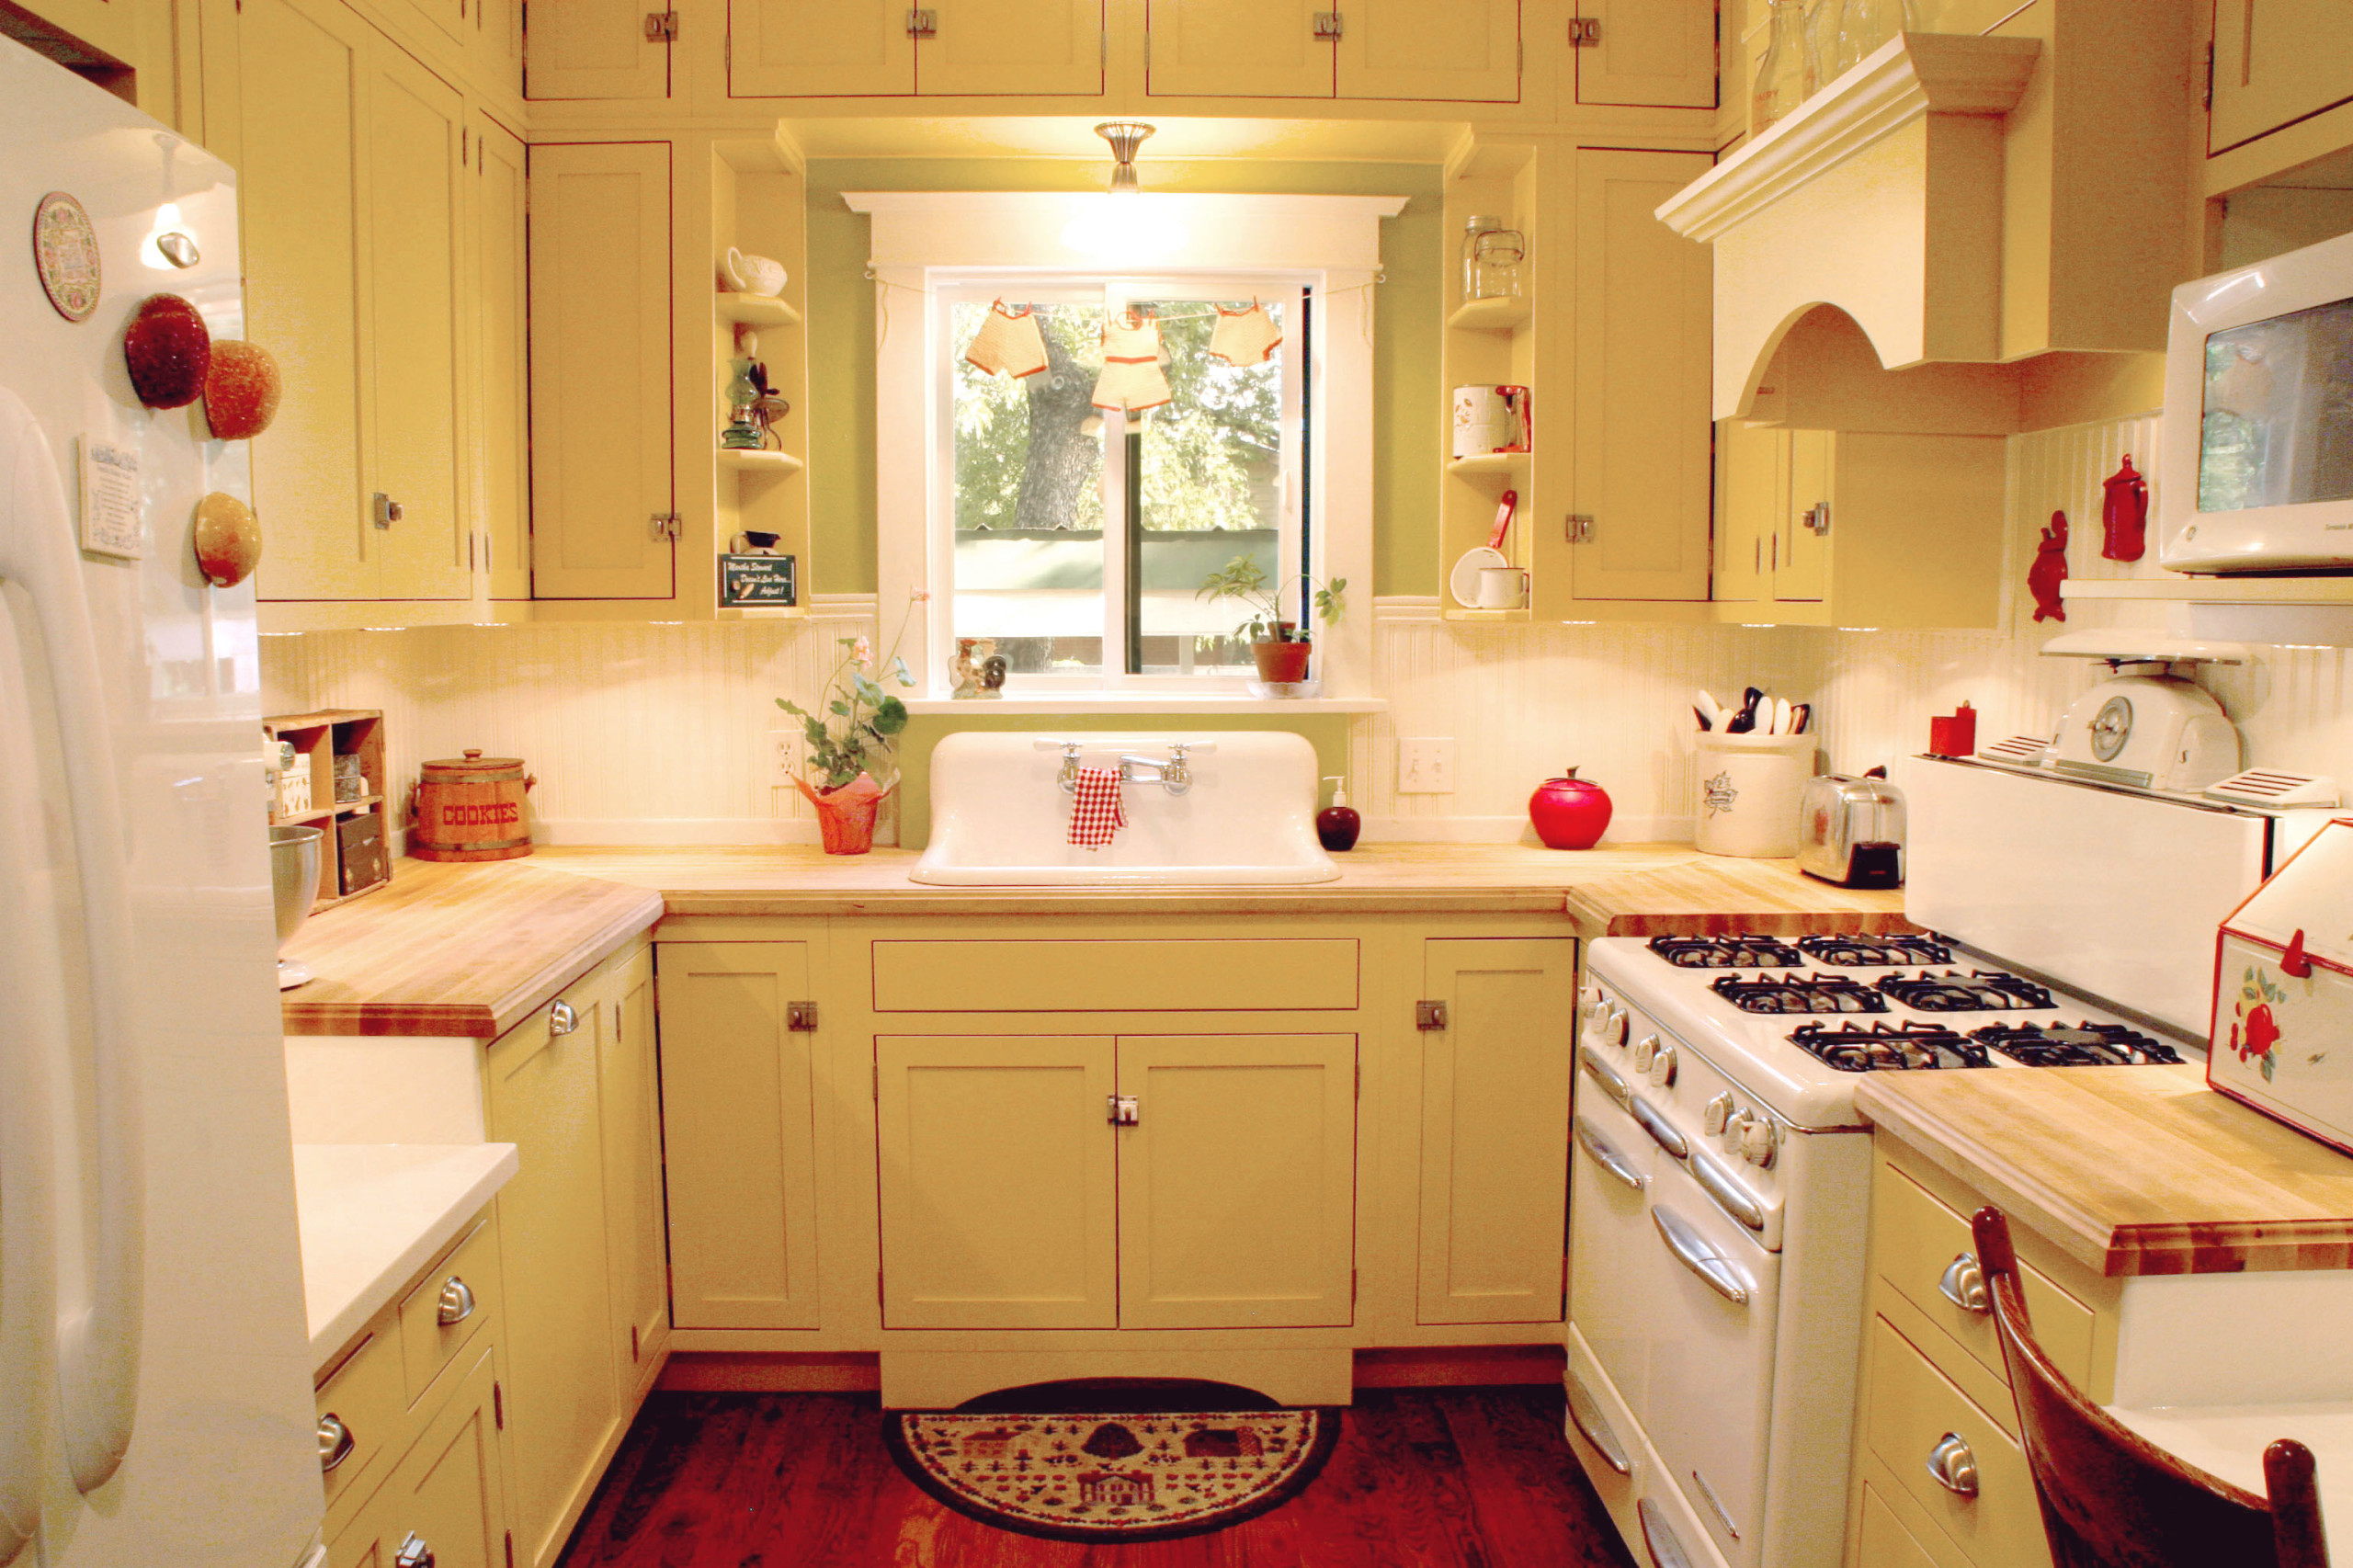 https://st.hzcdn.com/simgs/pictures/kitchens/turn-of-the-century-style-kitchen-remodel-creative-kitchenz-img~9cd1863d038a39da_14-5586-1-b83664b.jpg